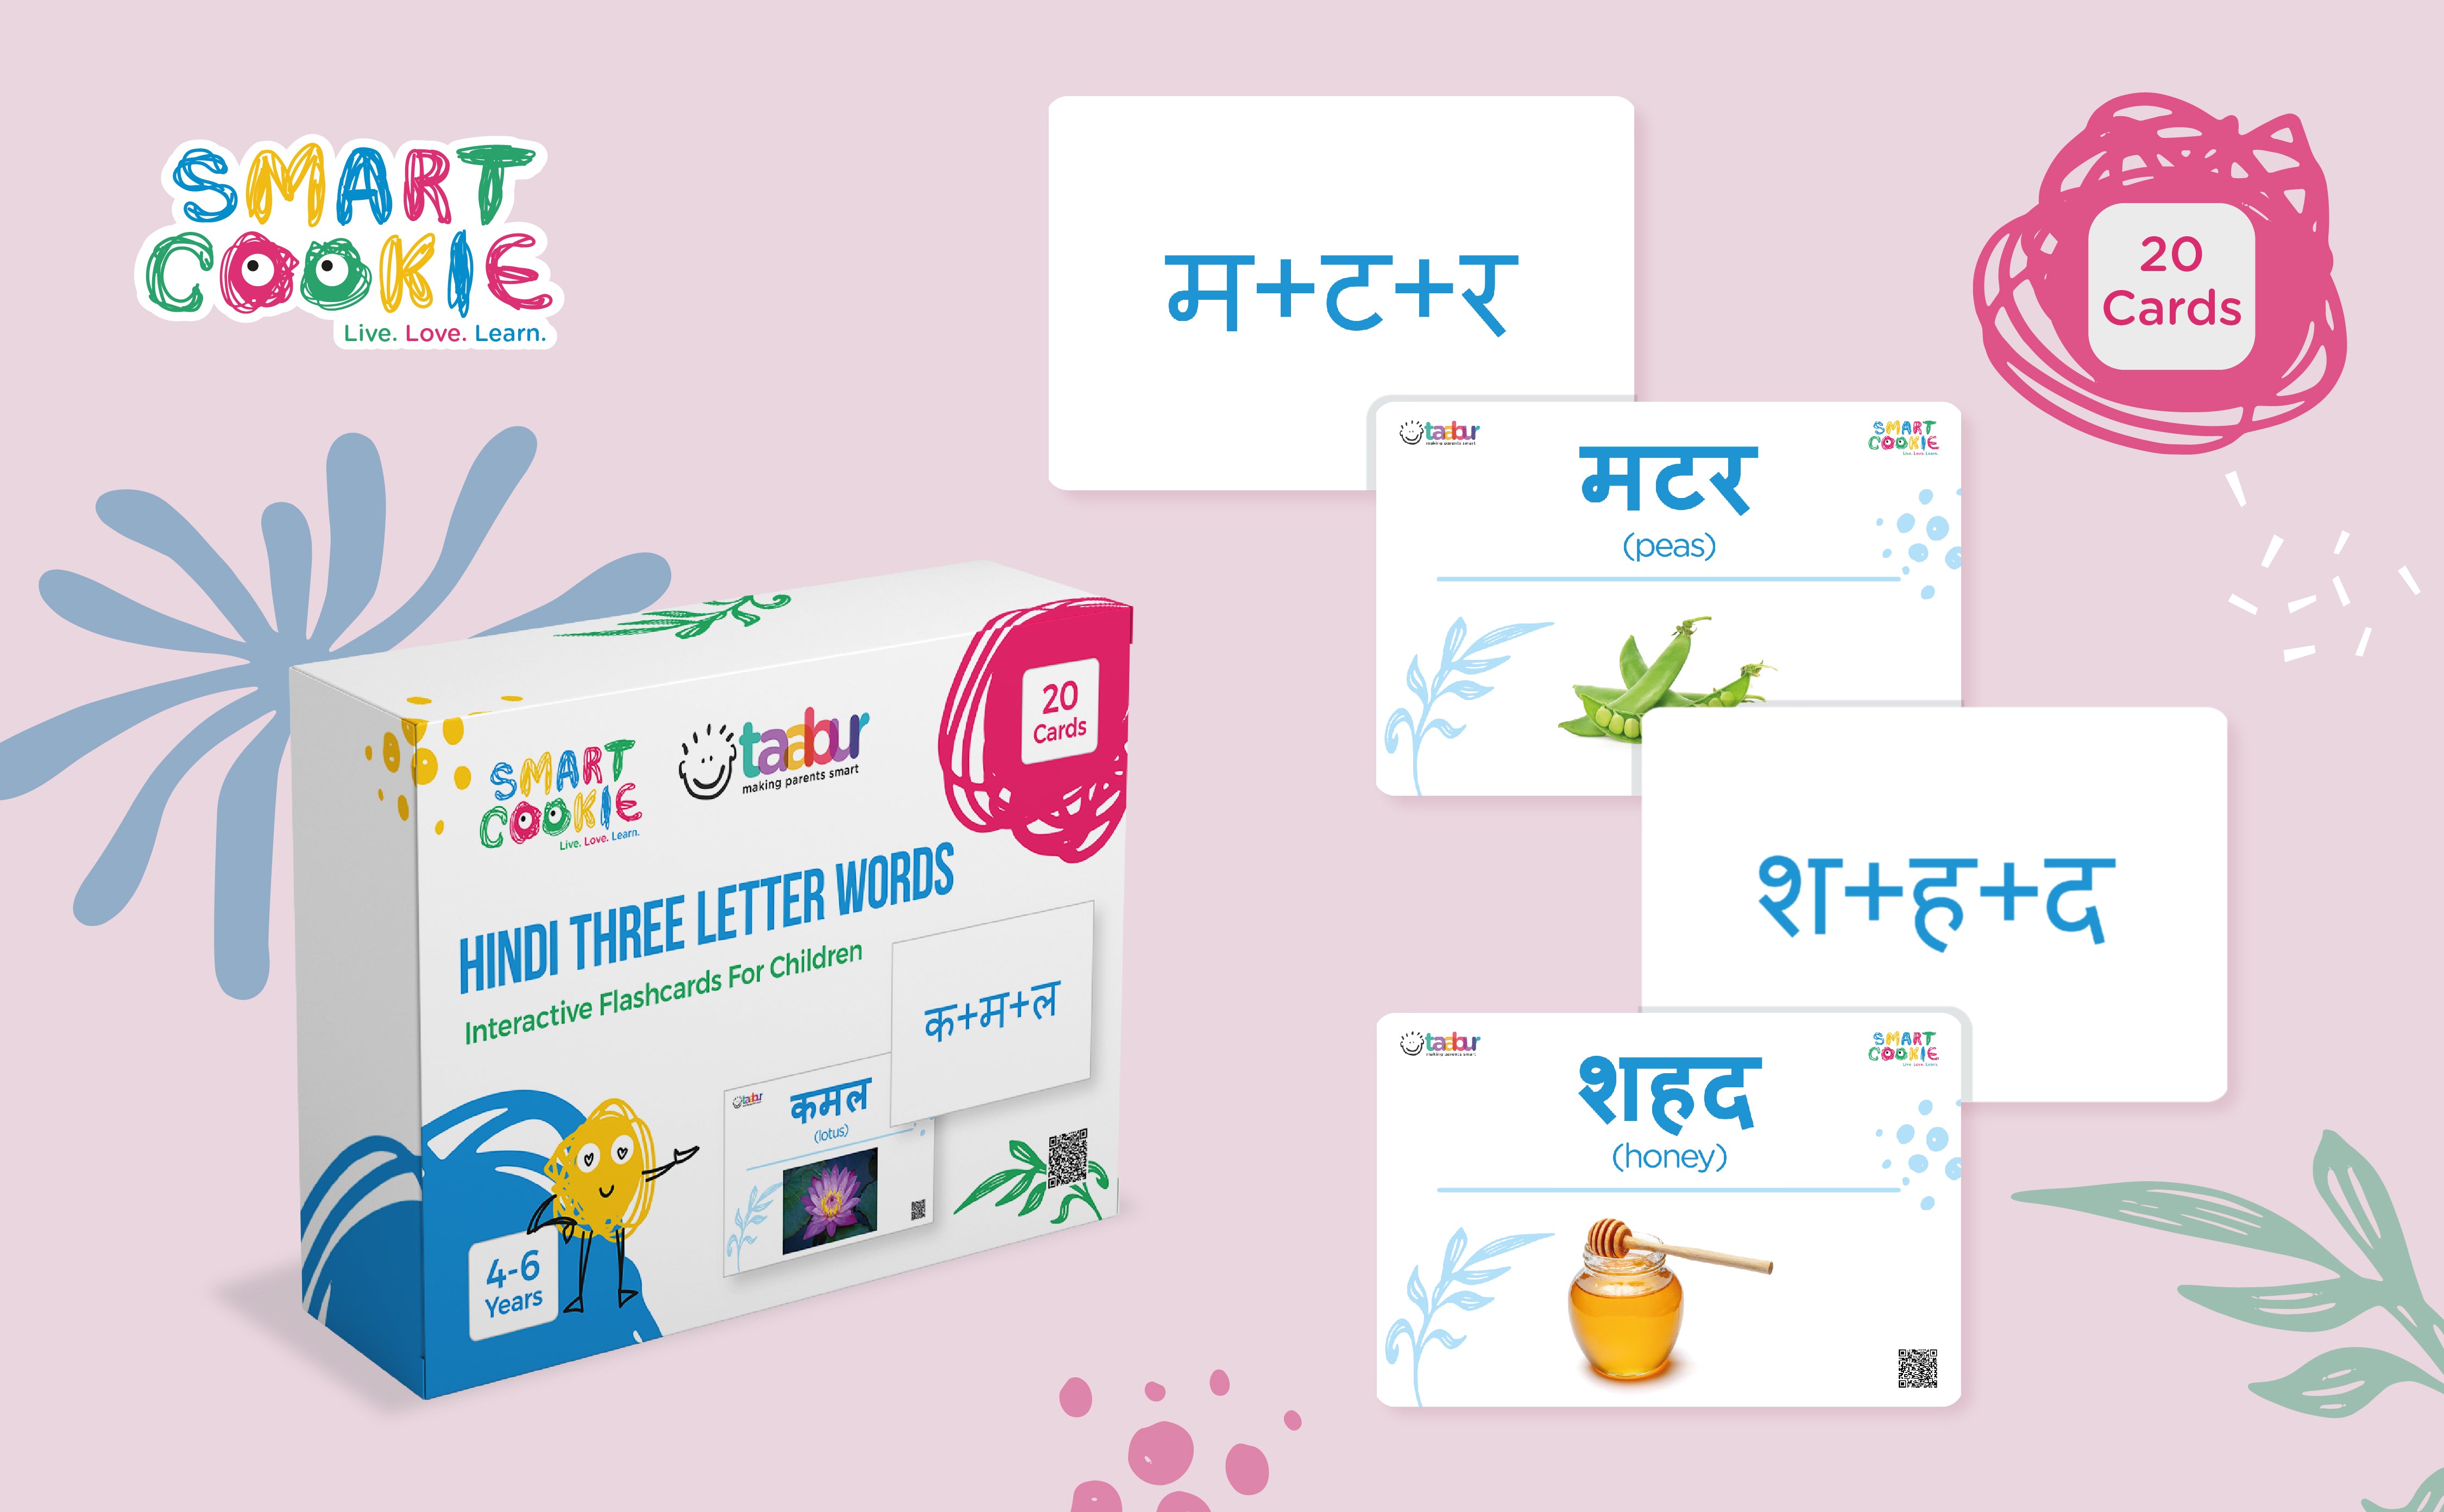 Hindi Three Letter Words - Interactive Flash Cards for Children (20 Cards) - for Kids Aged 4 to 6 Years Old